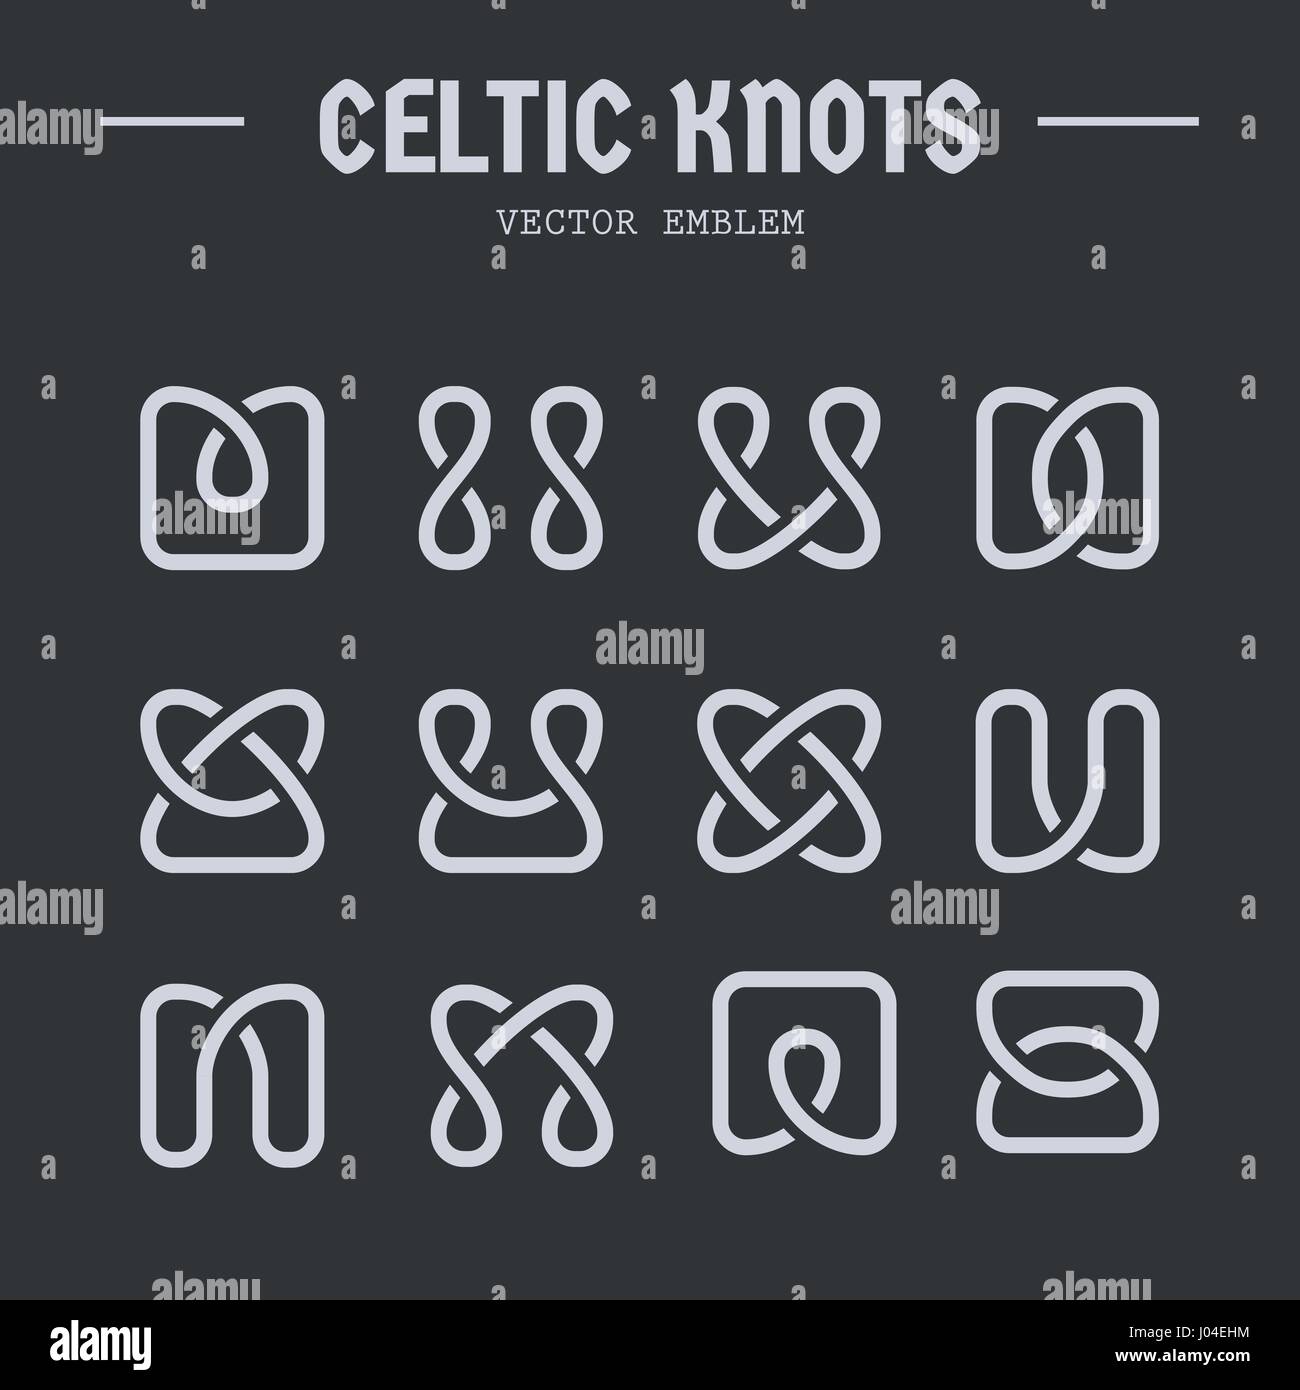 Celtic knots inspired vector logos collection. Irish pattern, ornament, simple elements on dark background Stock Vector